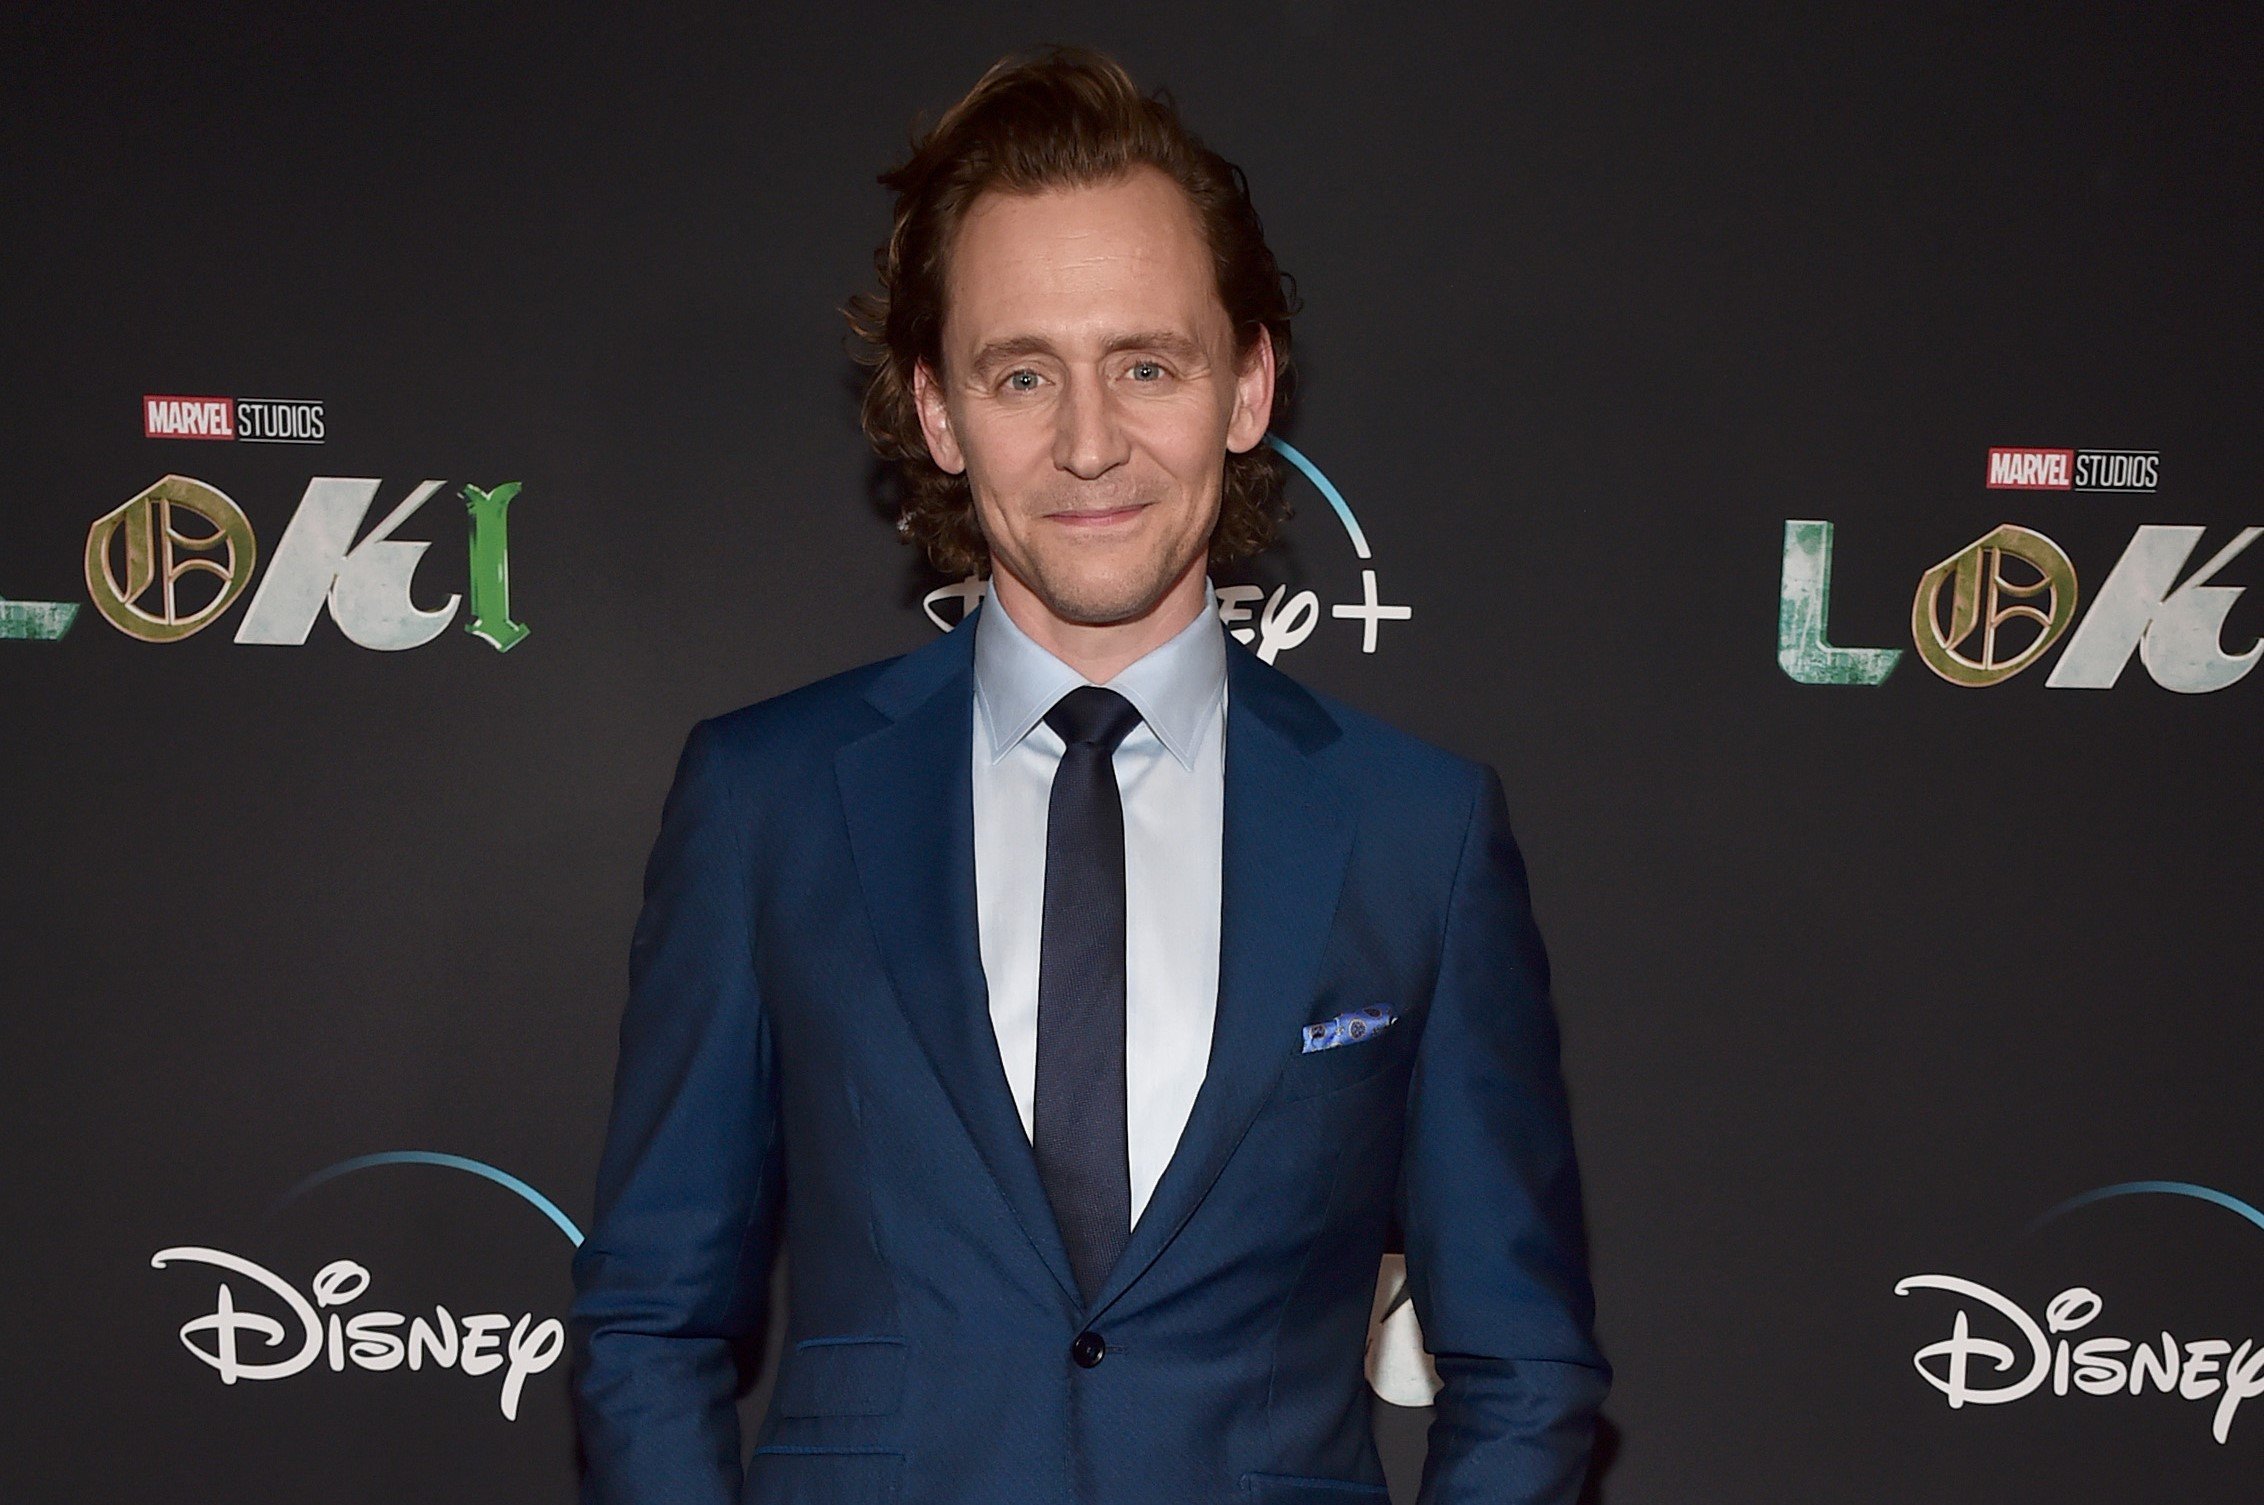 Tom Hiddleston, who played Loki in the 'Thor' movies, wears a dark blue suit over